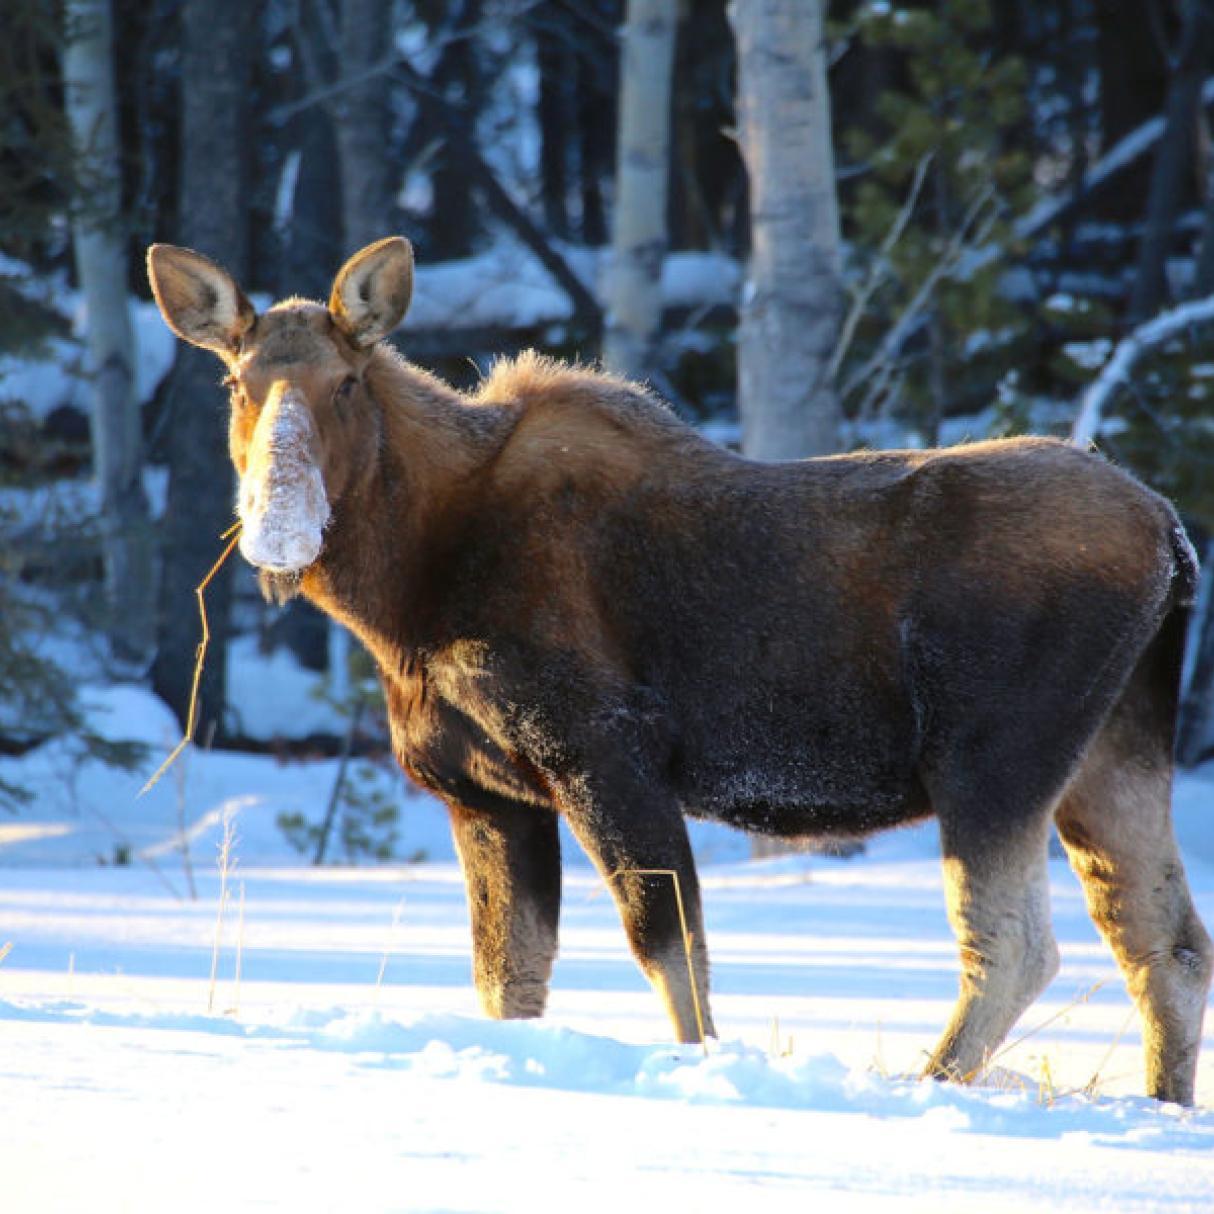 A large brown moose without antlers stands in the snow with yellow grass in its mouth.